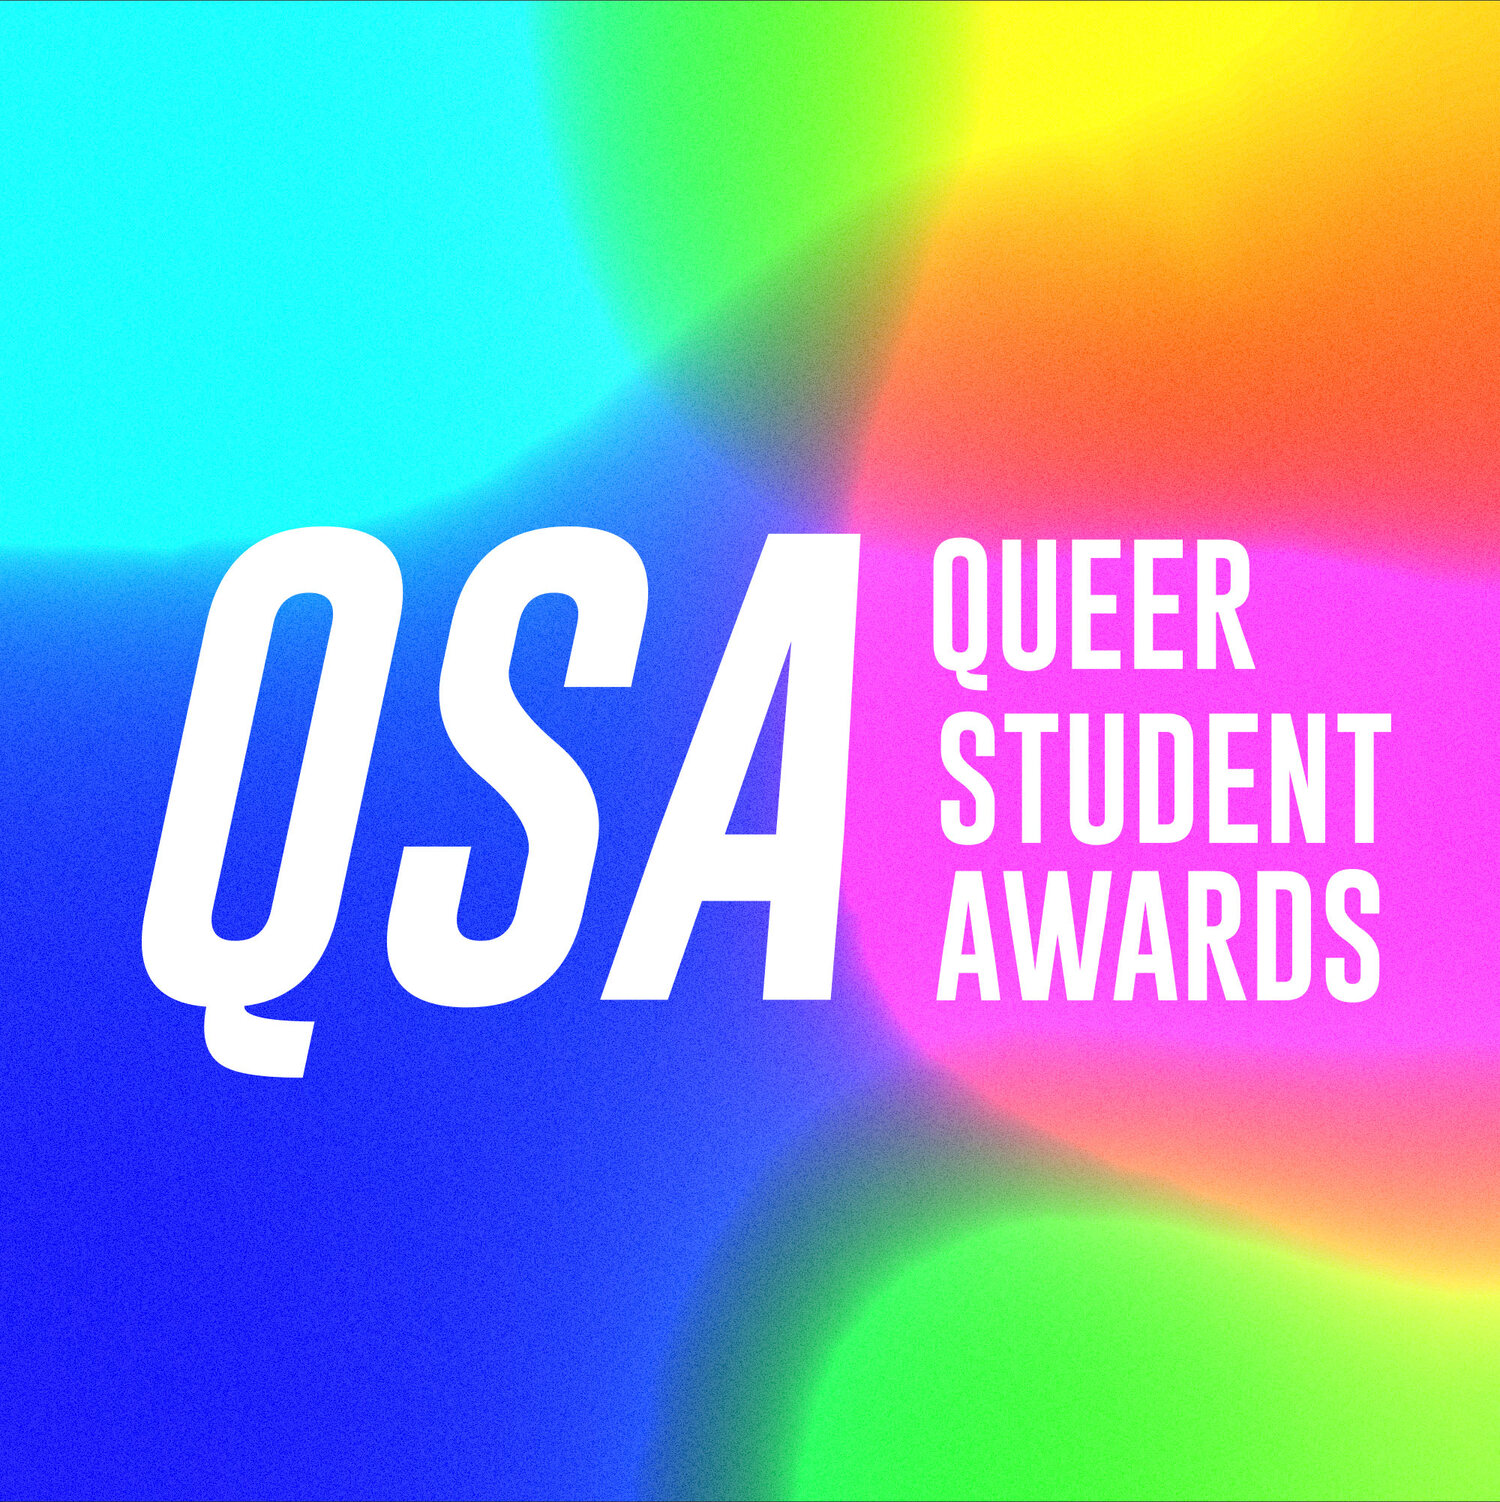 The Queer Student Awards